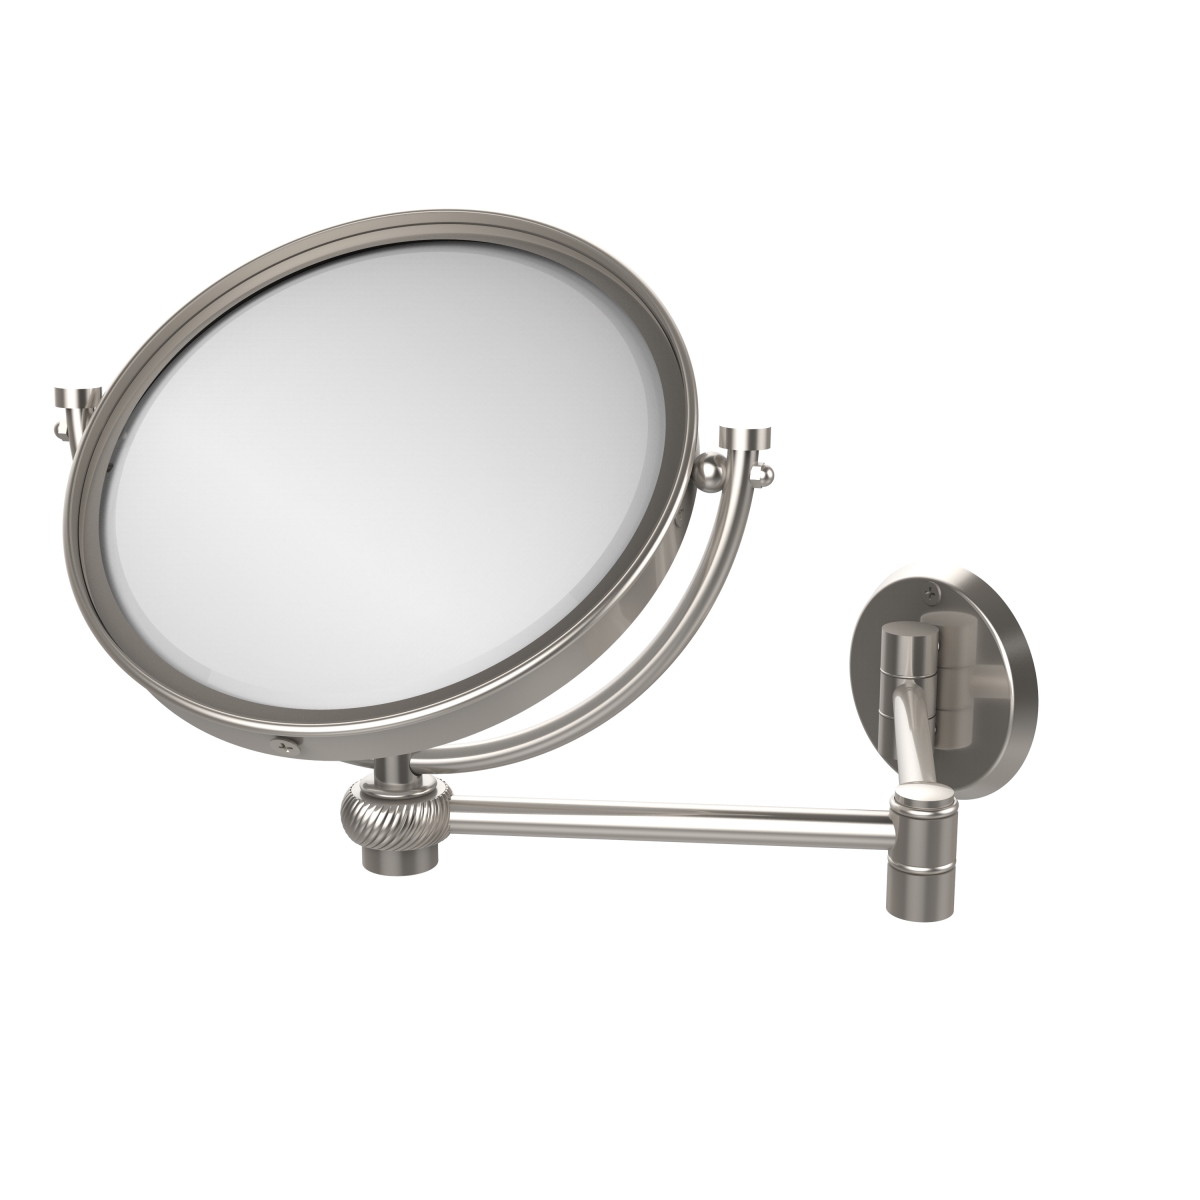 WM-6T-2X-SN 8 in. Wall Mounted Extending Make-Up Mirror 2X Magnification with Twist Accent, Satin Nickel -  Allied Brass, WM-6T/2X-SN